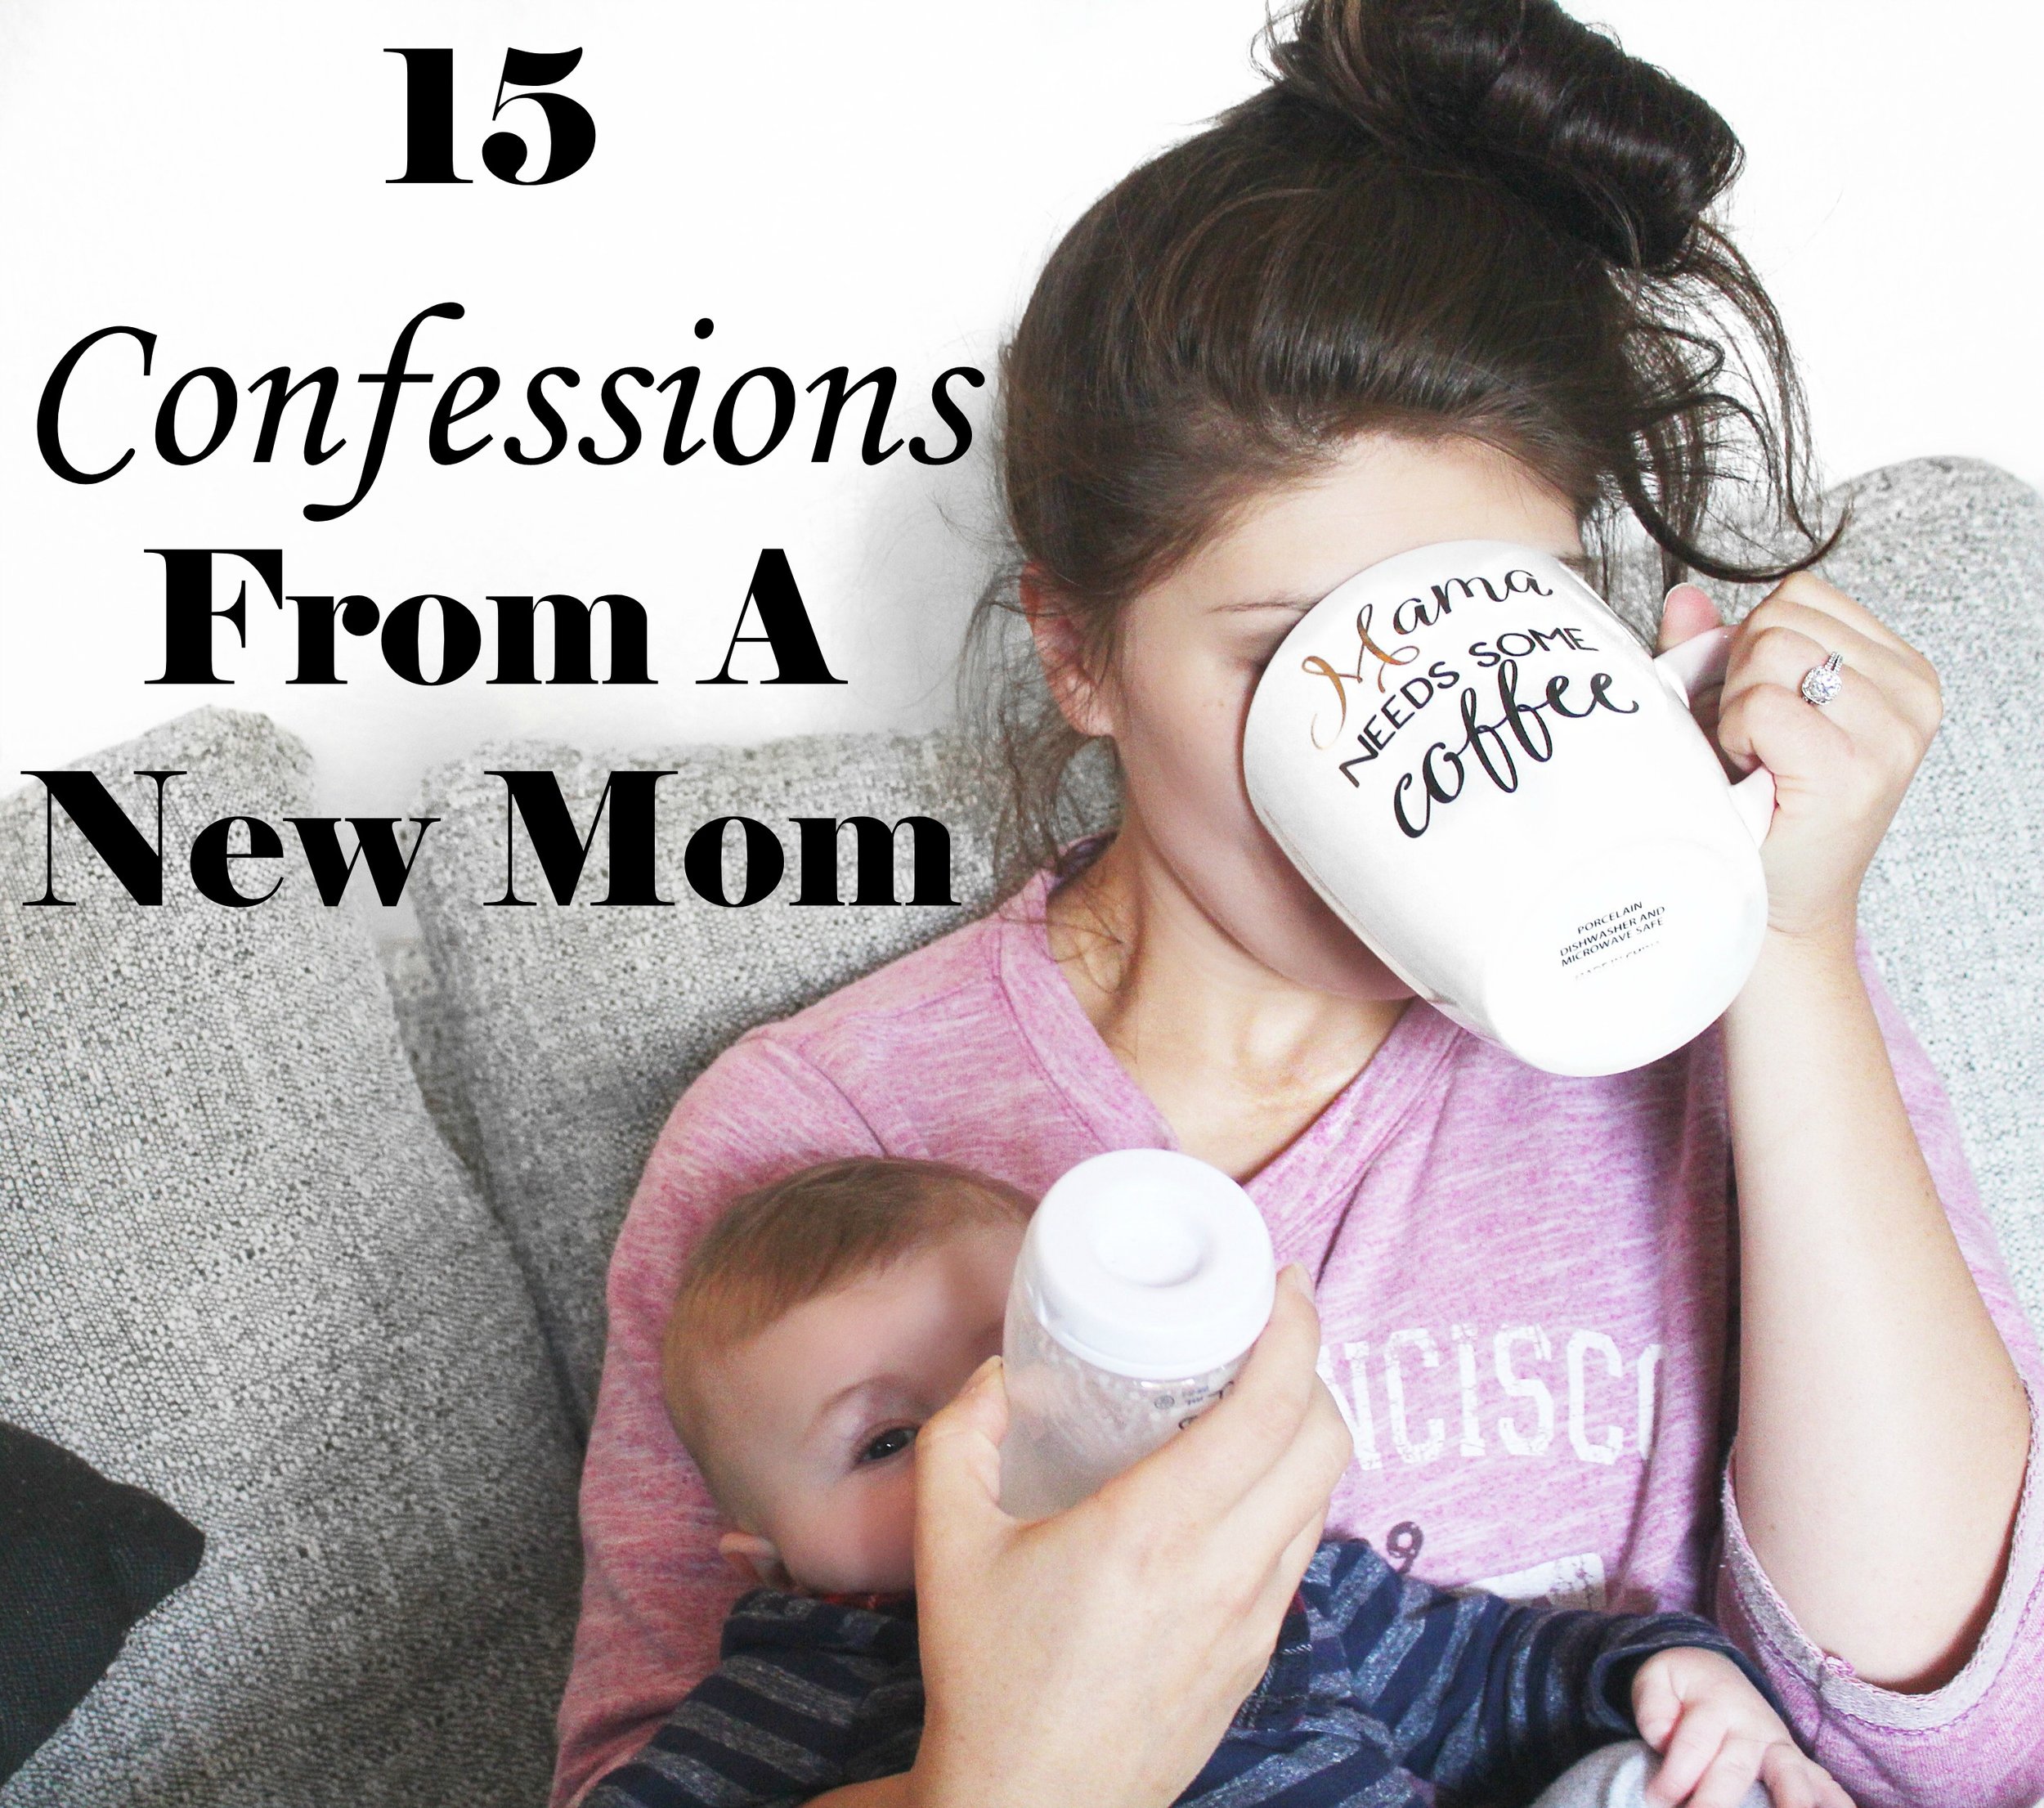 15-confessions-from-a-new-mom.jpg